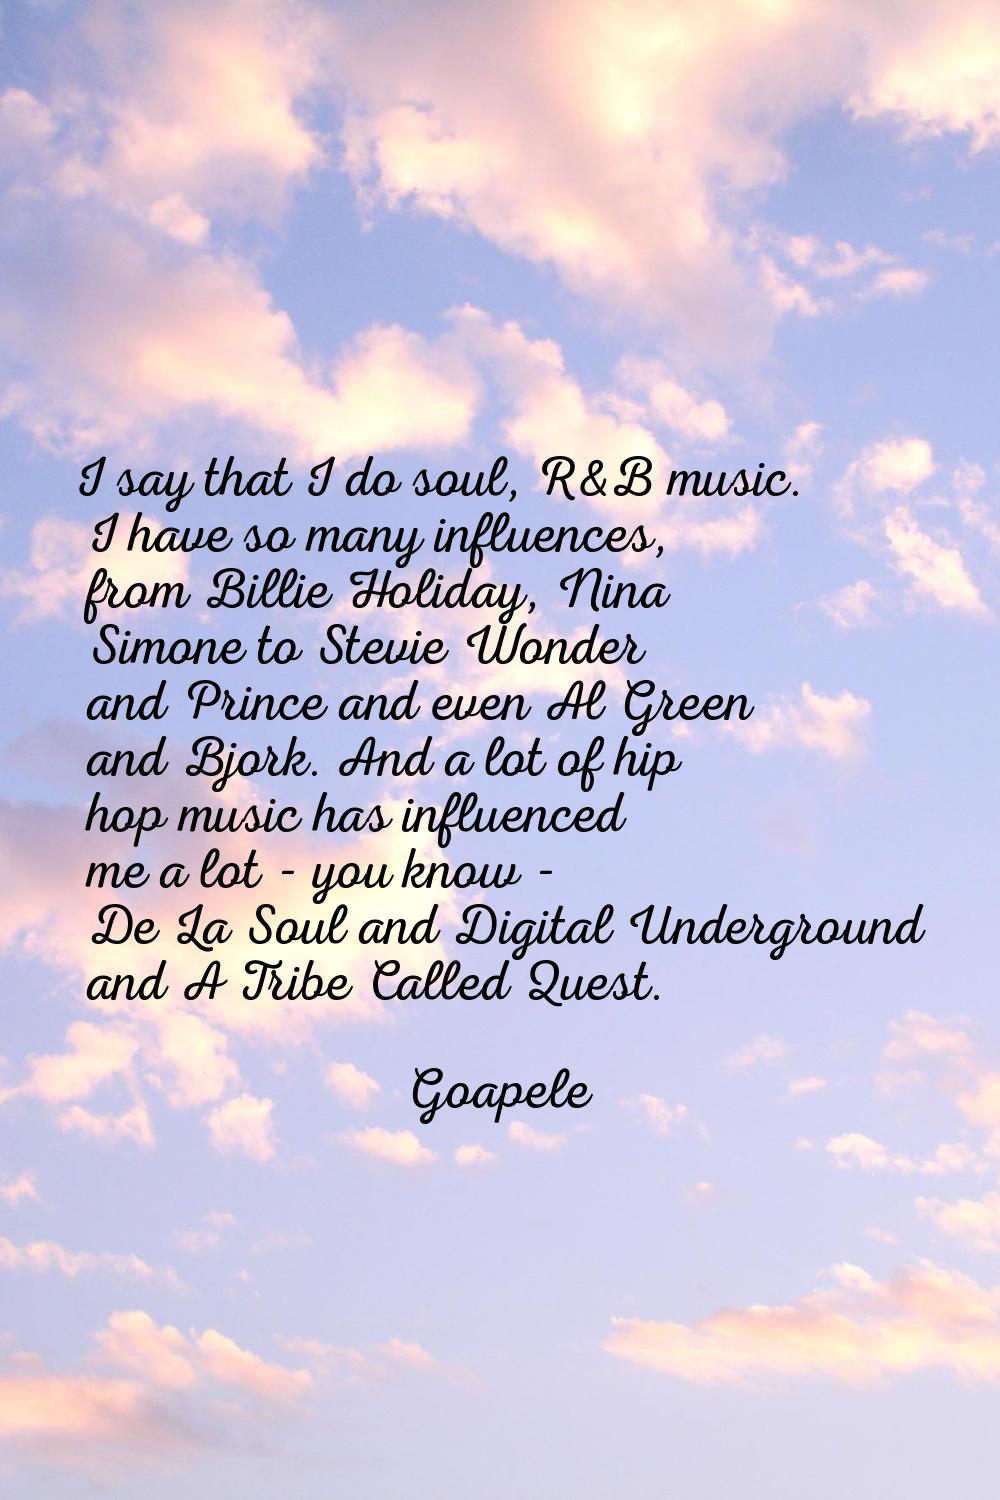 I say that I do soul, R&B music. I have so many influences, from Billie Holiday, Nina Simone to Ste